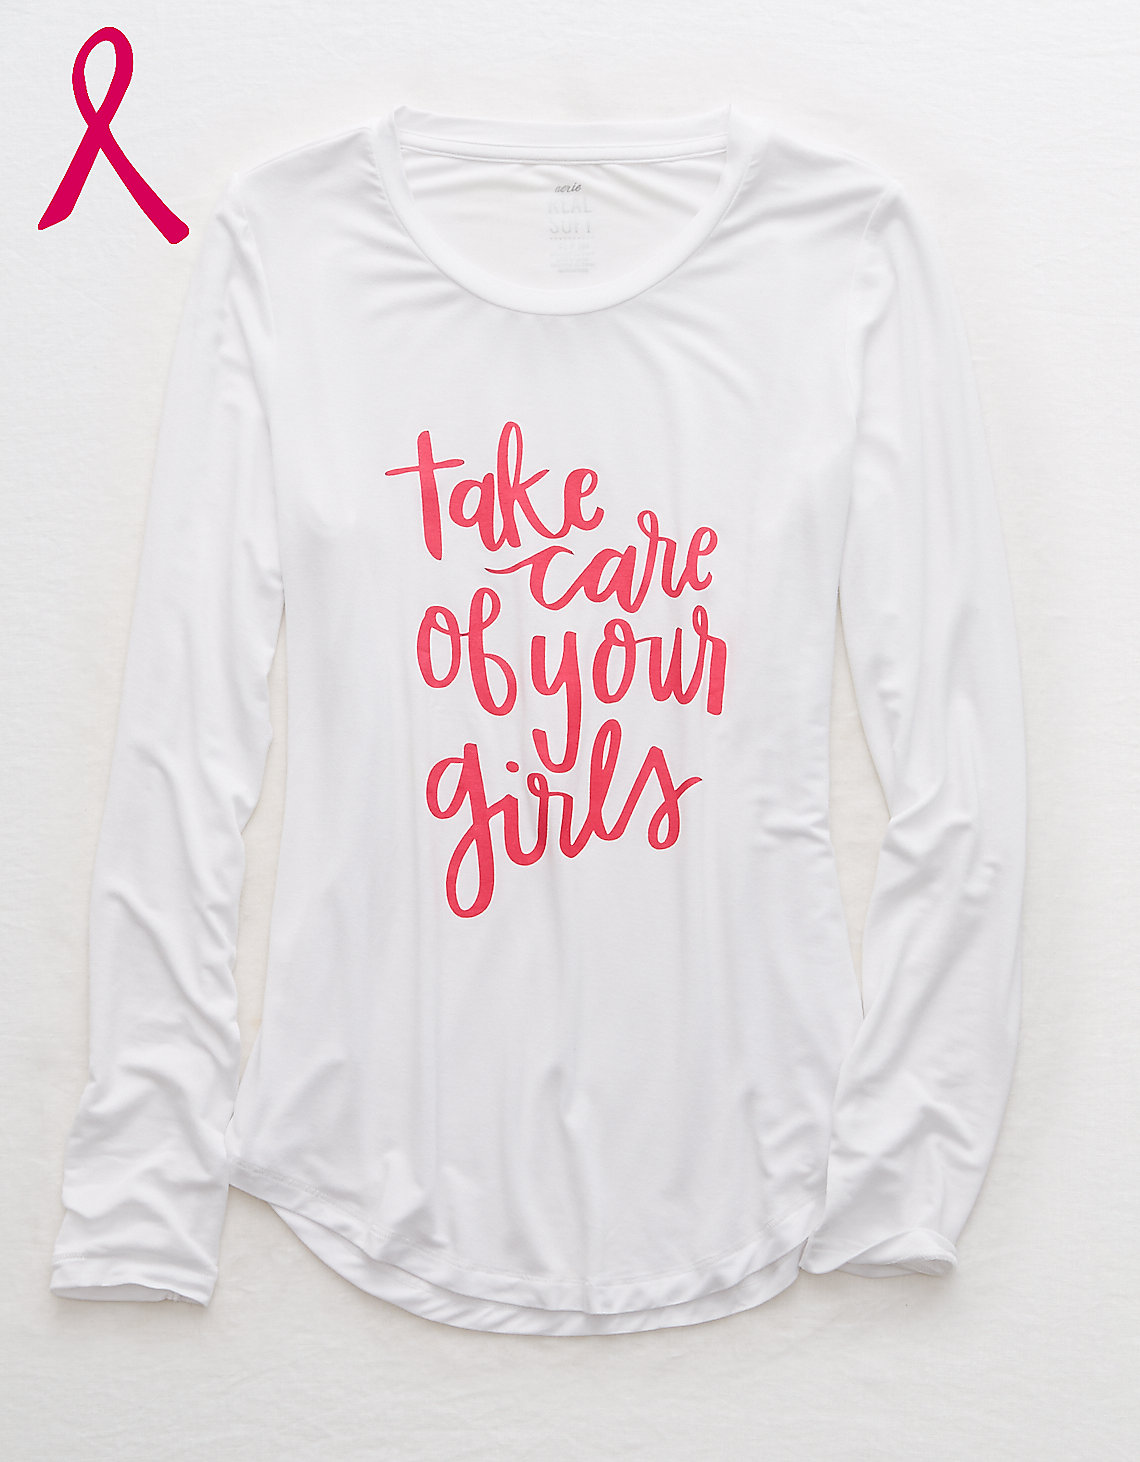 Aerie Supports Tee - 20 Brands Helping Battle Breast Cancer - Breast Cancer Research - Giving Back - Paying It Forward - Breast Cancer Awareness - Companies That Donate To Charity - Think Pink In October - October Breast Cancer Month - Communikait by Kait Hanson